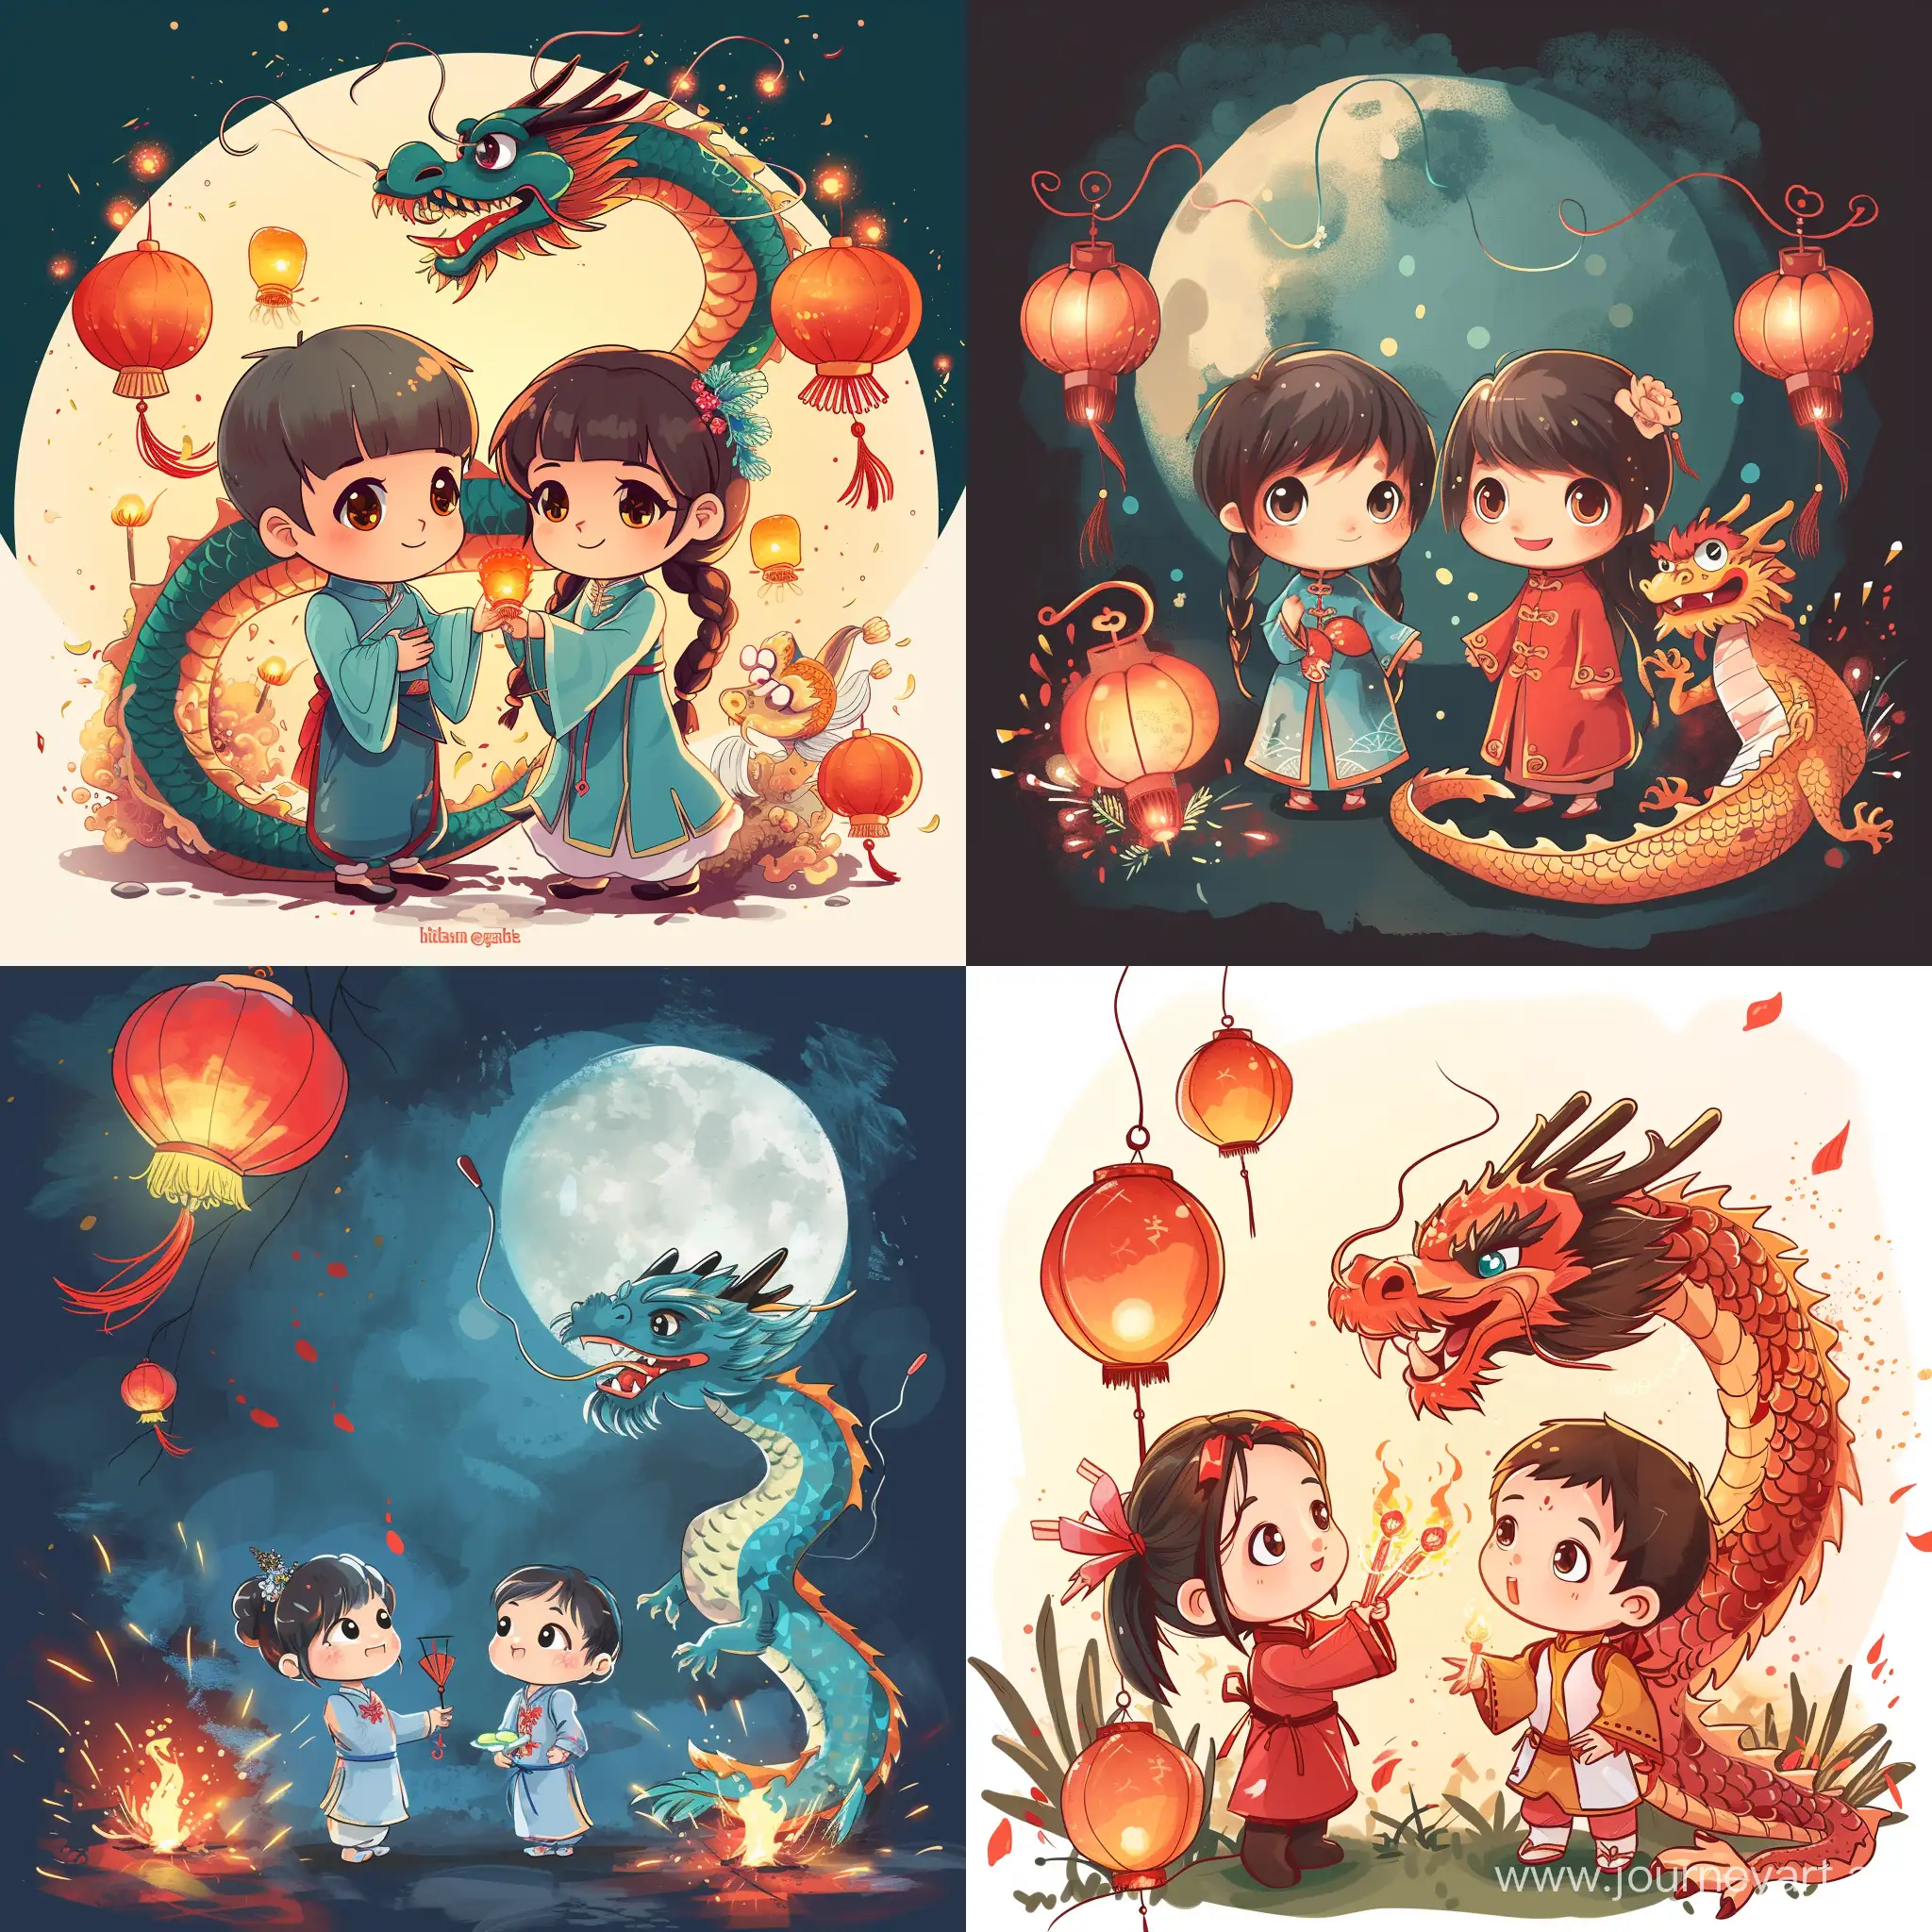 2 chibi children and dragon lunar festival vibrant vibe with lanterns and firecrackers


